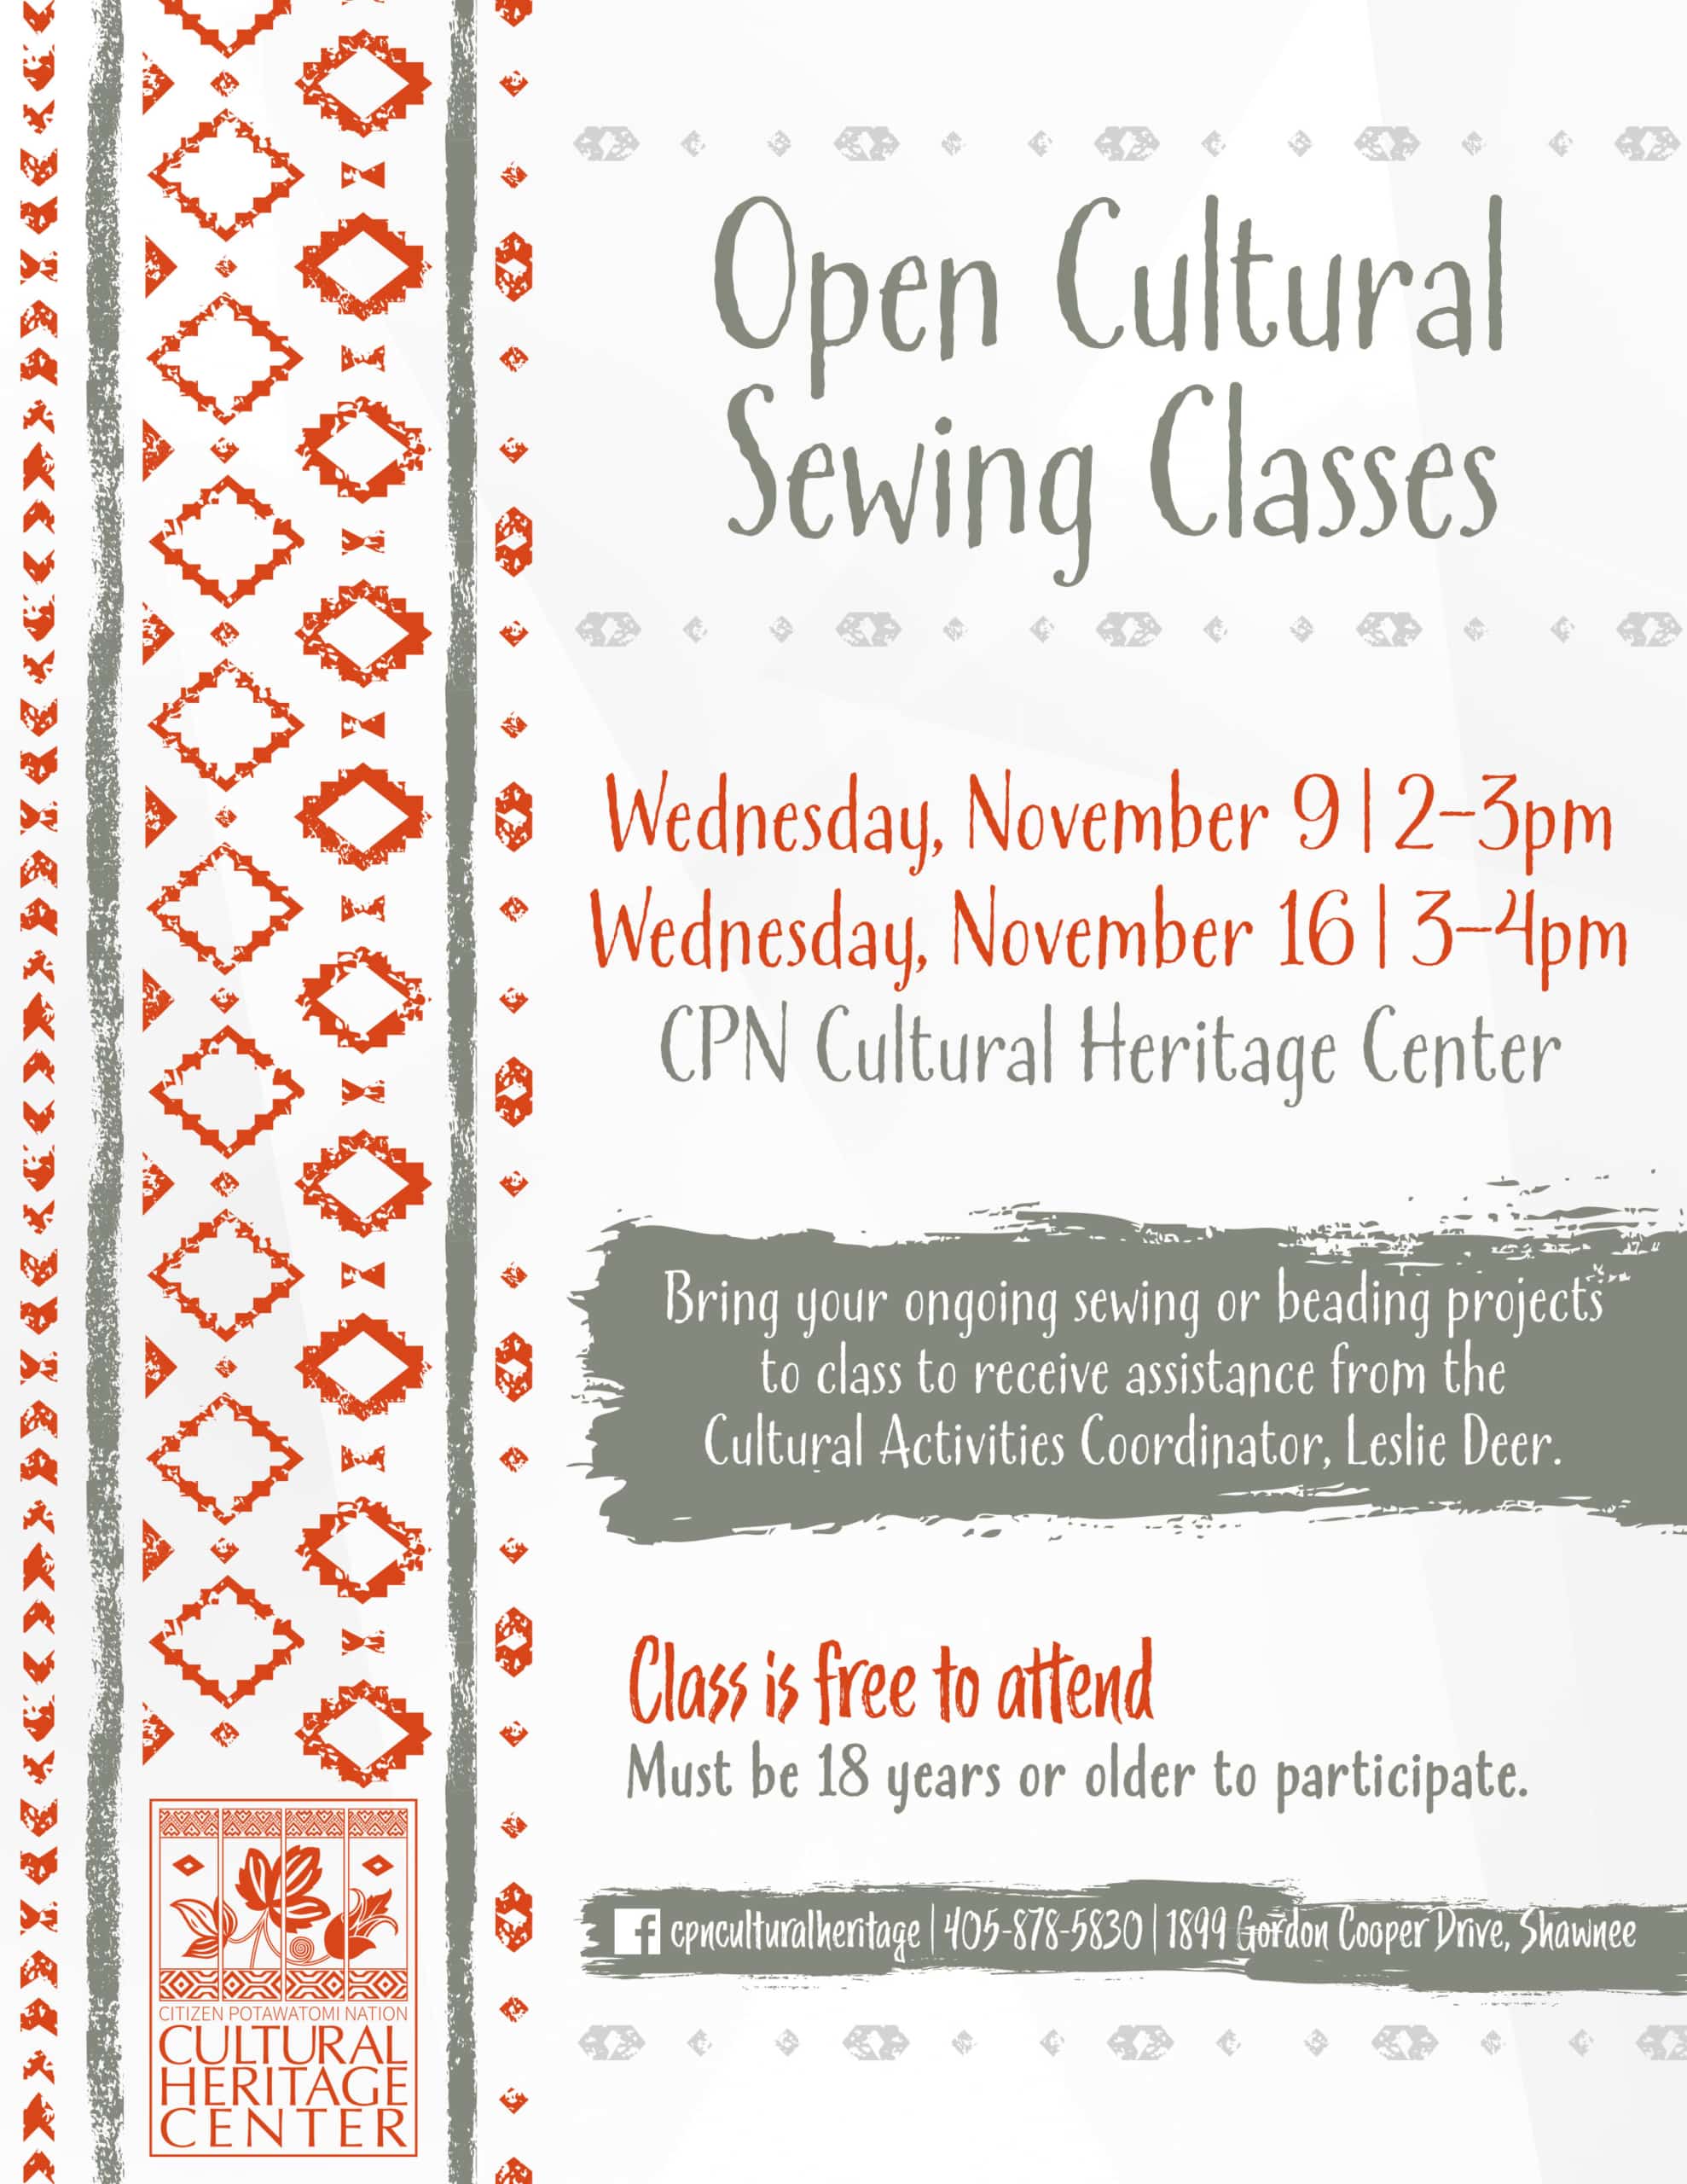 Red and grey geometric designs frame class details for the November 9 and November 16 Open Cultural Sewing Classes at the CPN Cultural Heritage Center.